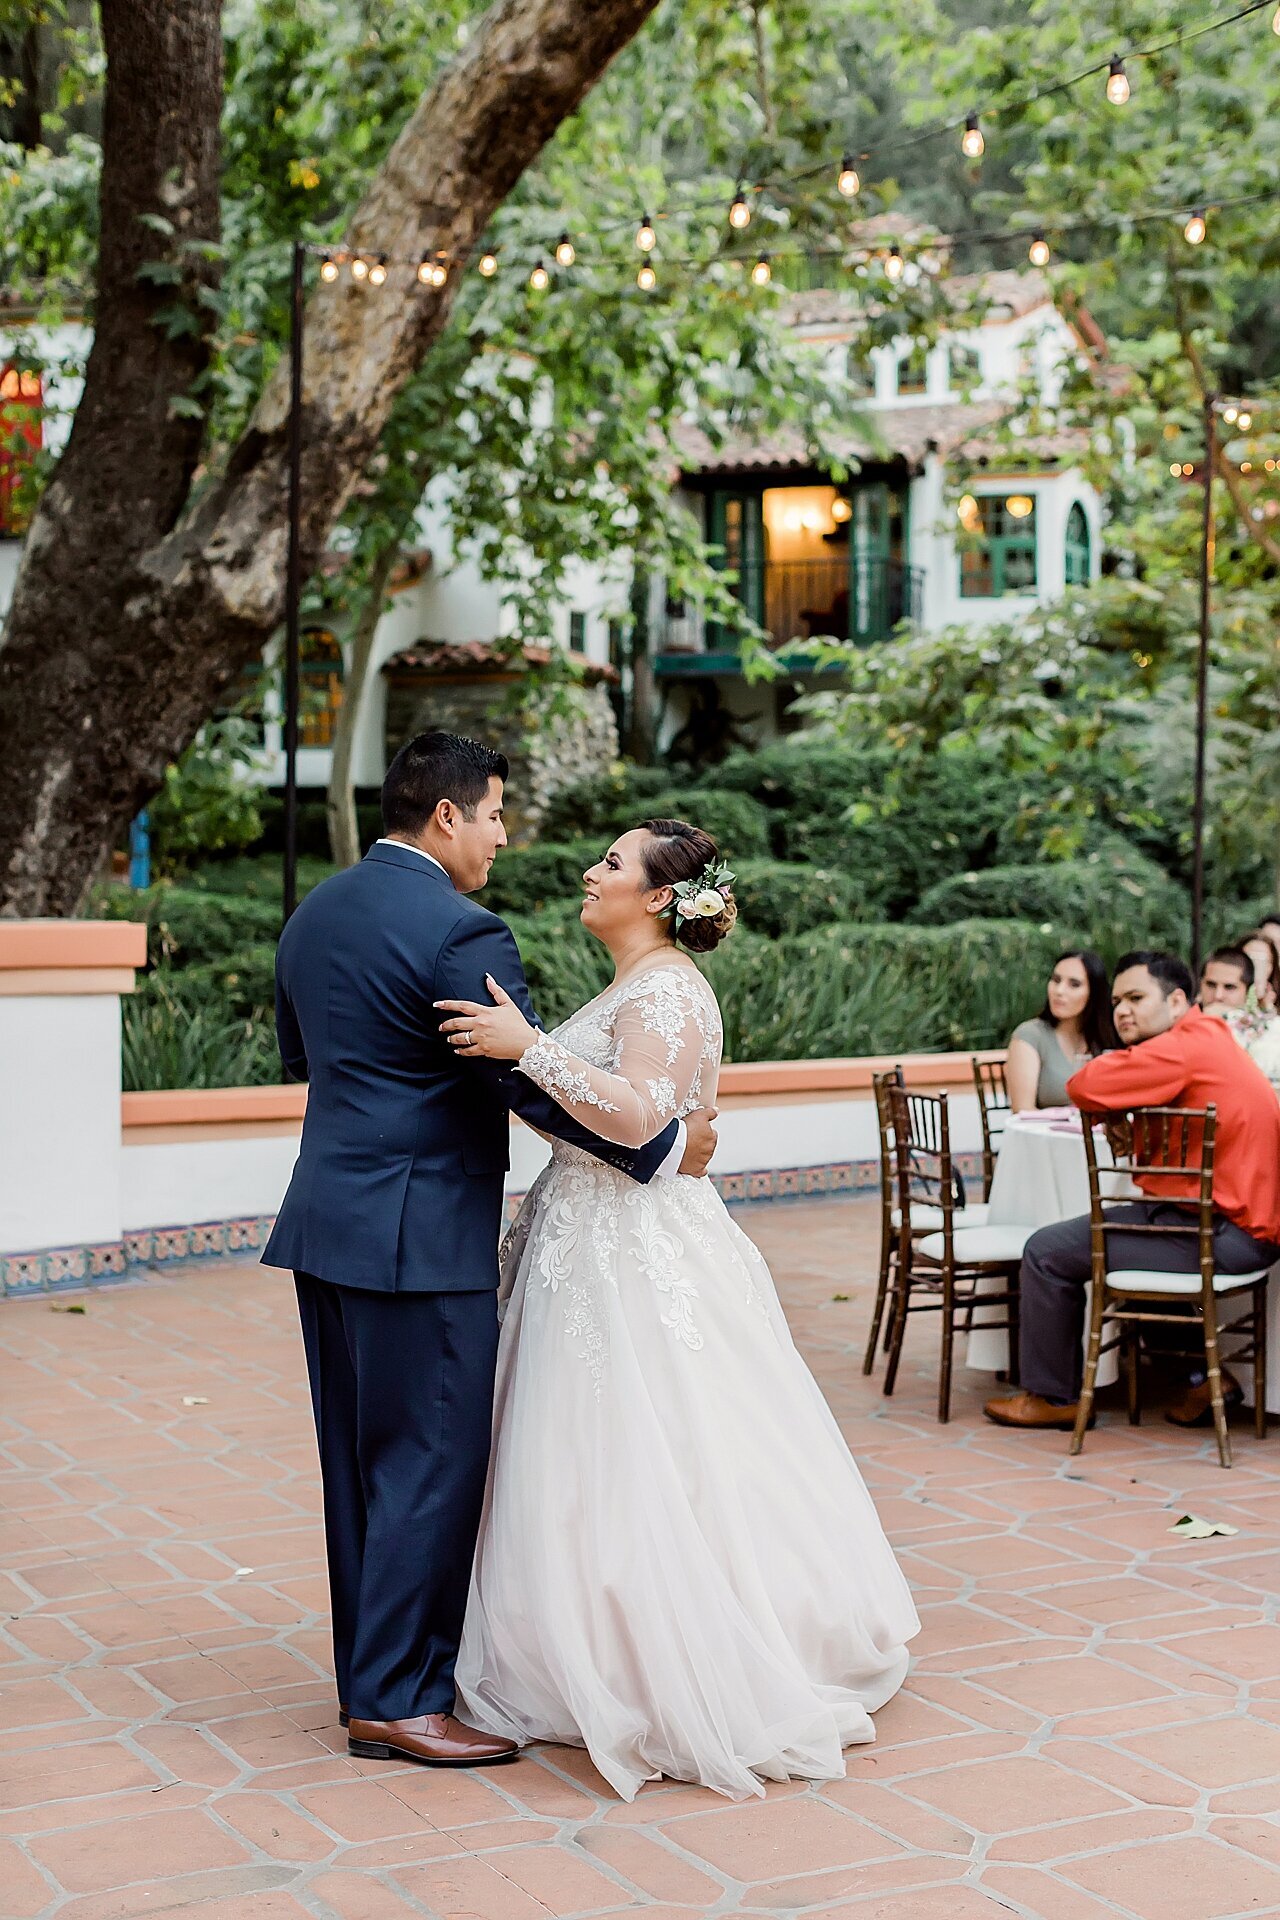 MIchelle Peterson Photography Redlands California wedding and portrait photographer_1156